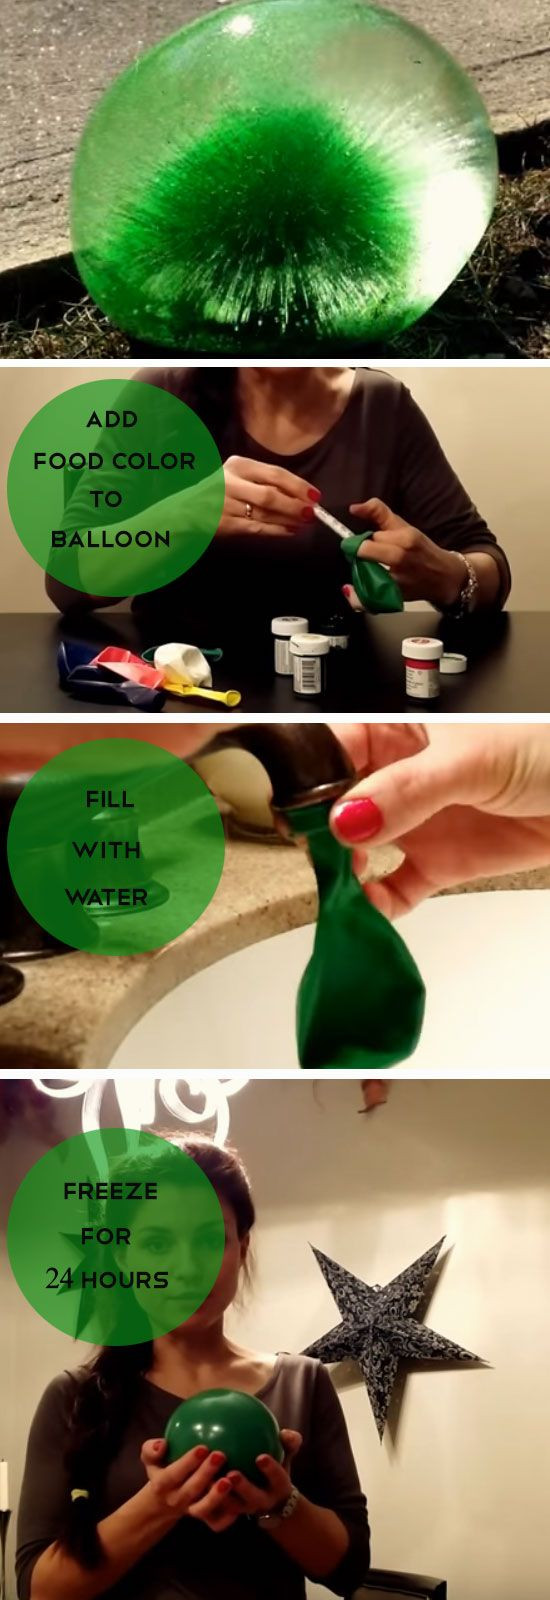 Fun Things To Make With Kids
 25 best ideas about Water balloons on Pinterest